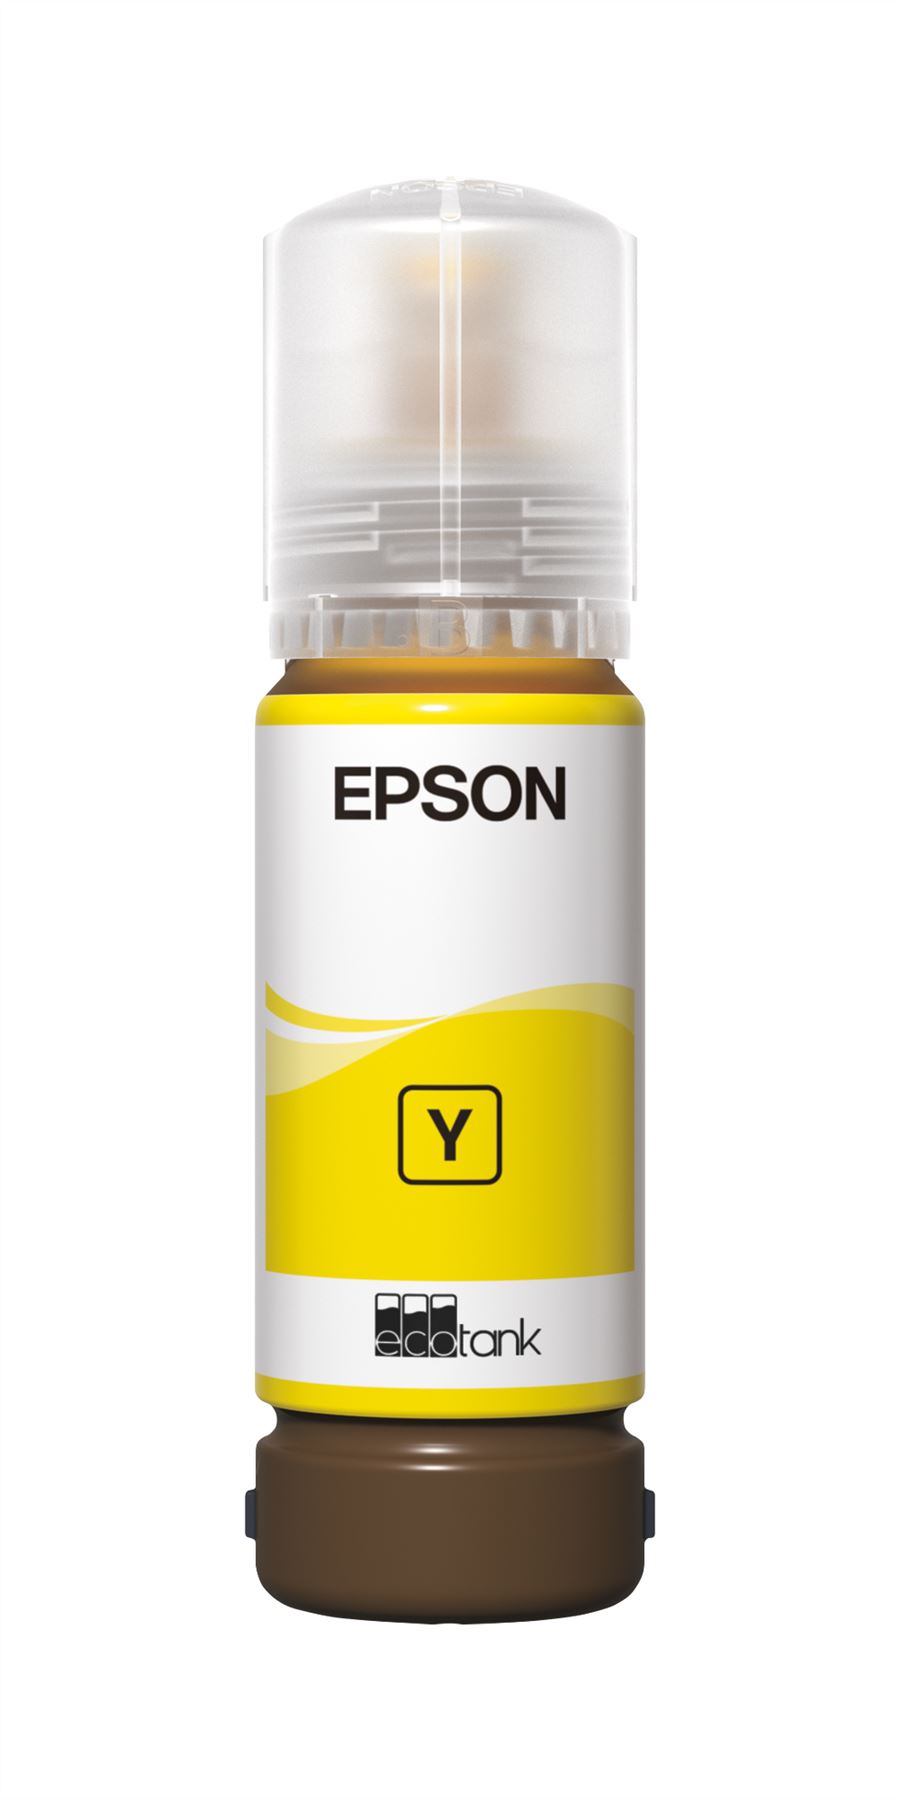 Epson C13T09B440/107 Ink cartridge yellow, 7.2K pages 70ml for Epson ET-18100